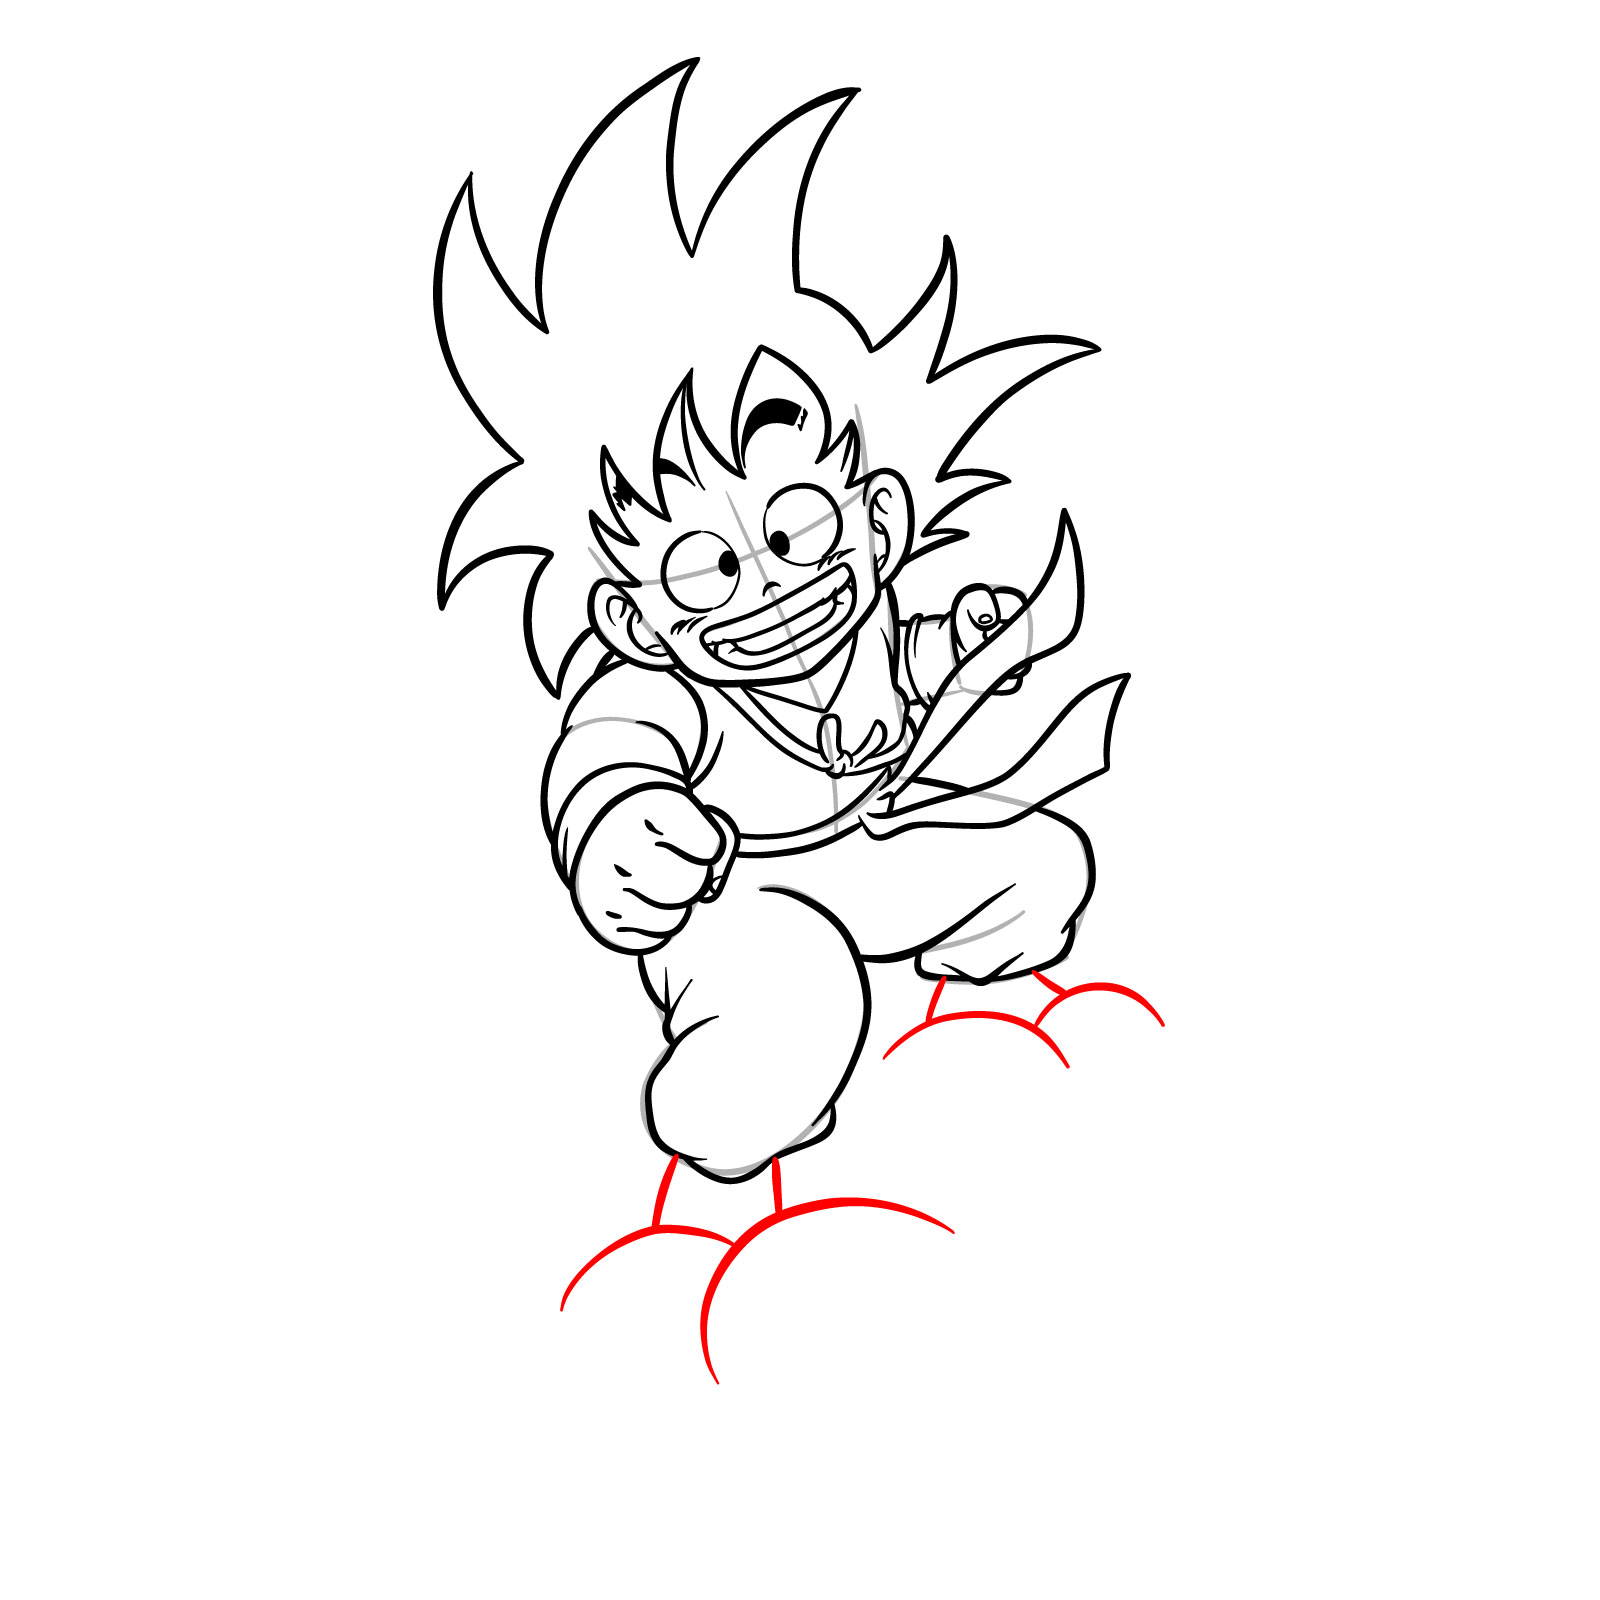 How to draw Kid Goku riding on the Flying Nimbus - step 21